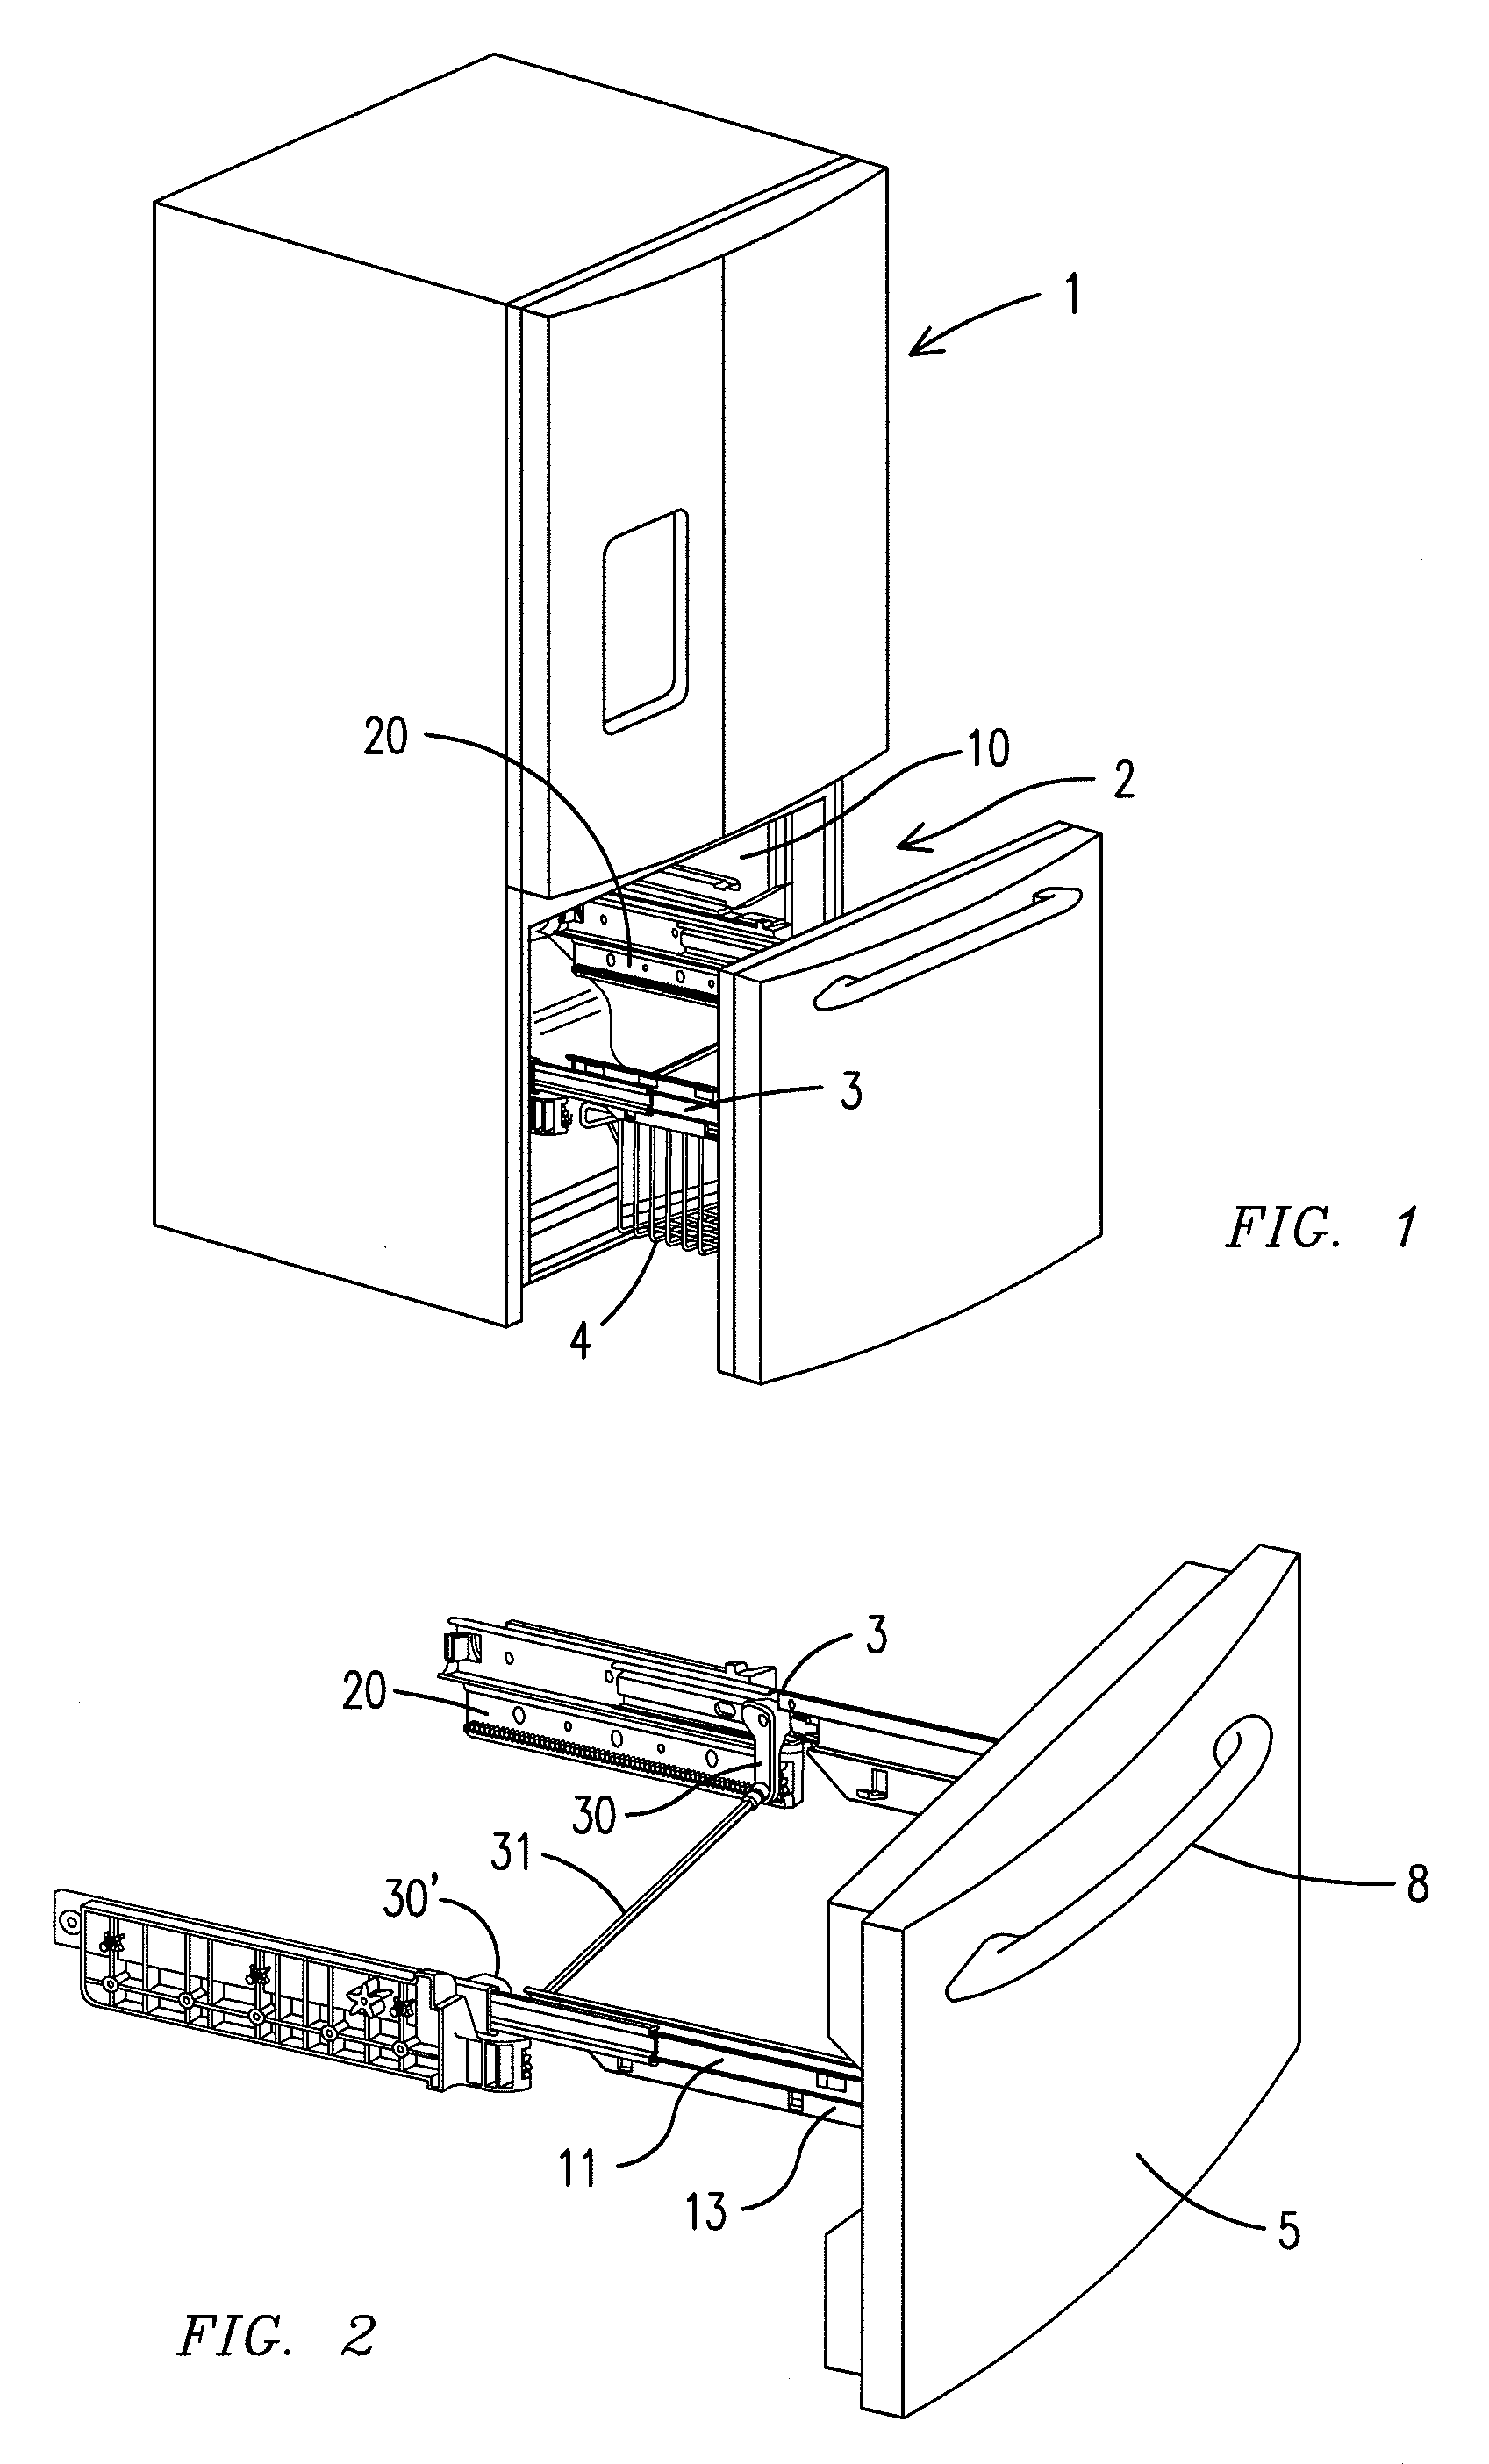 Support beam for a cabinet drawer